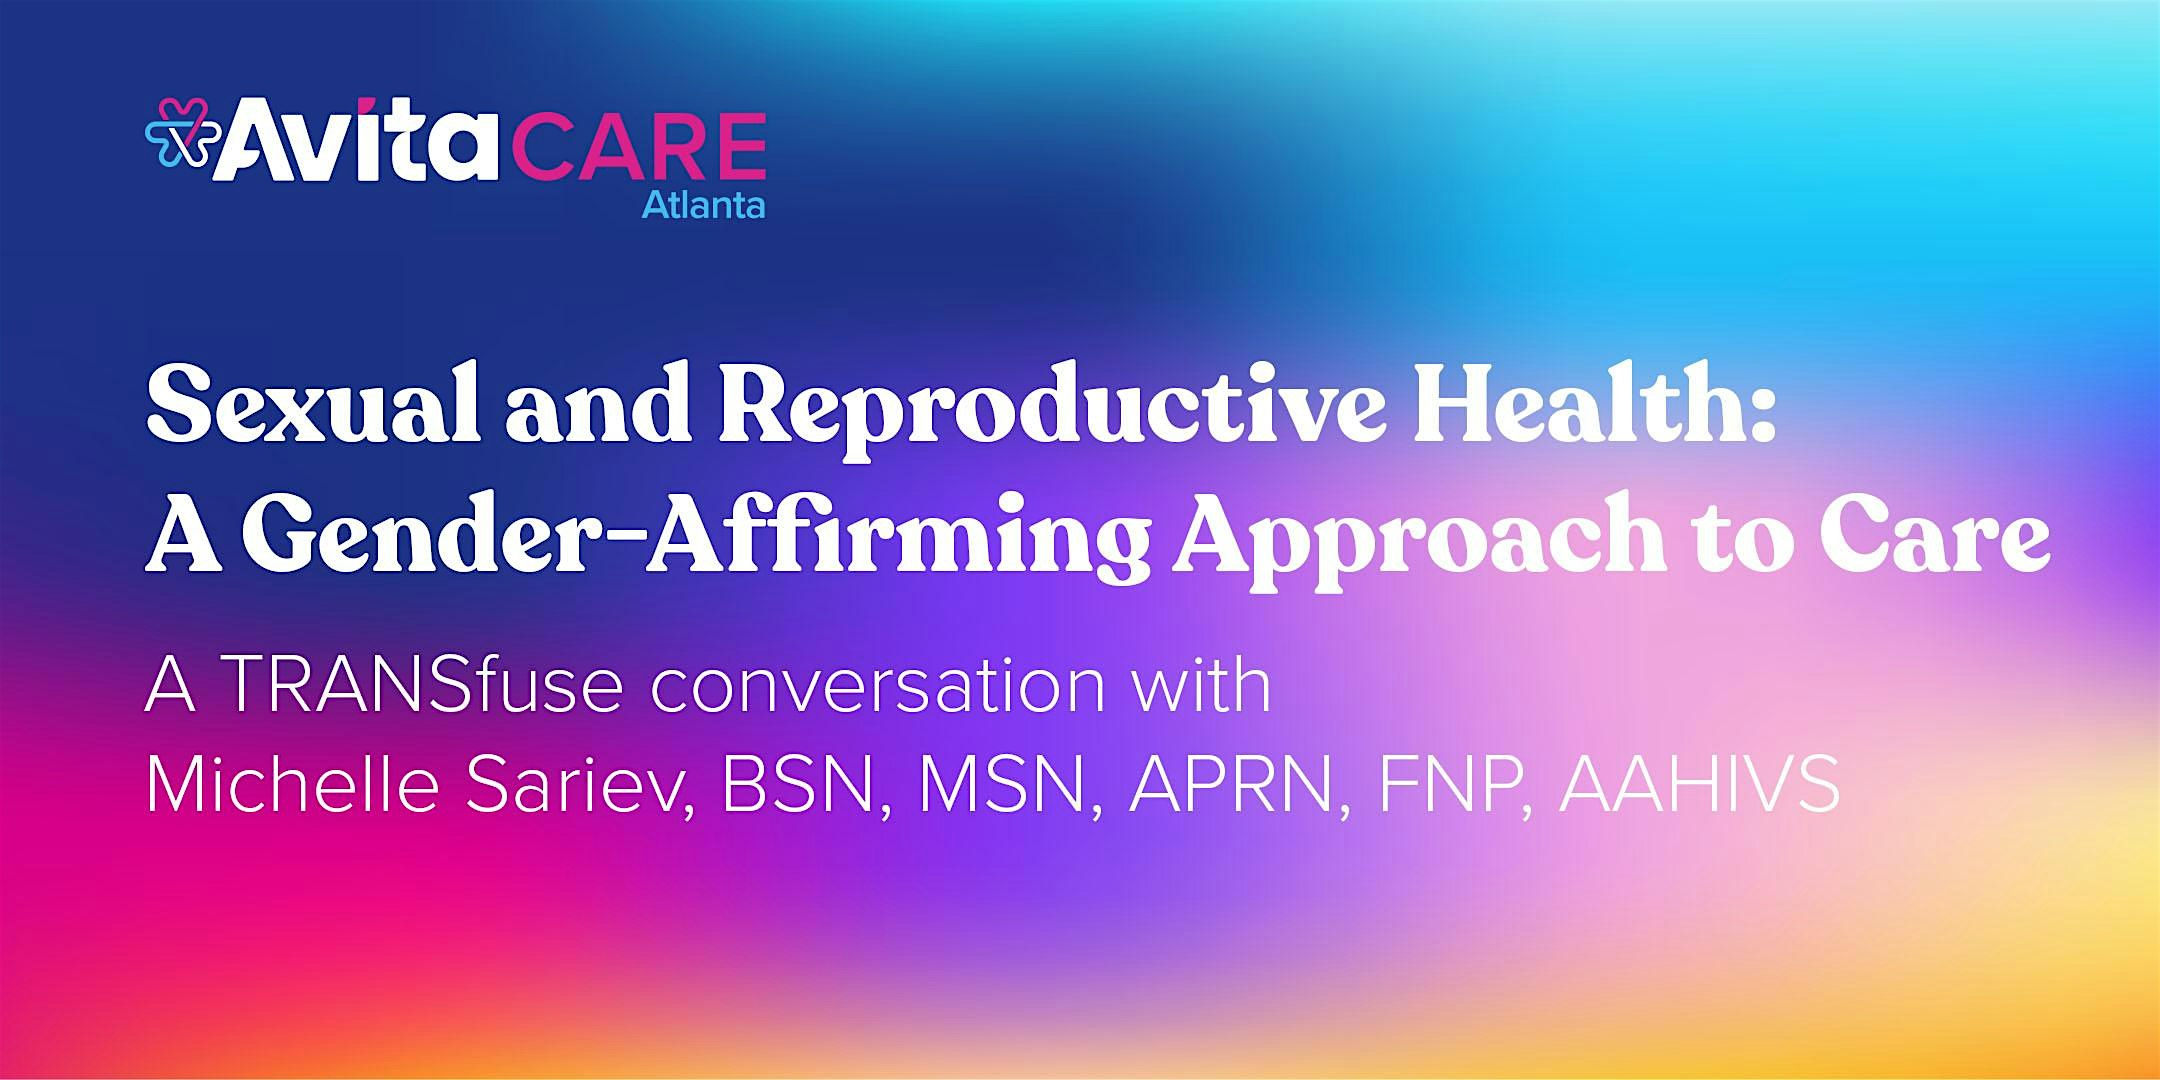 Sexual and Reproductive Health: A Gender-Affirming Approach to Care